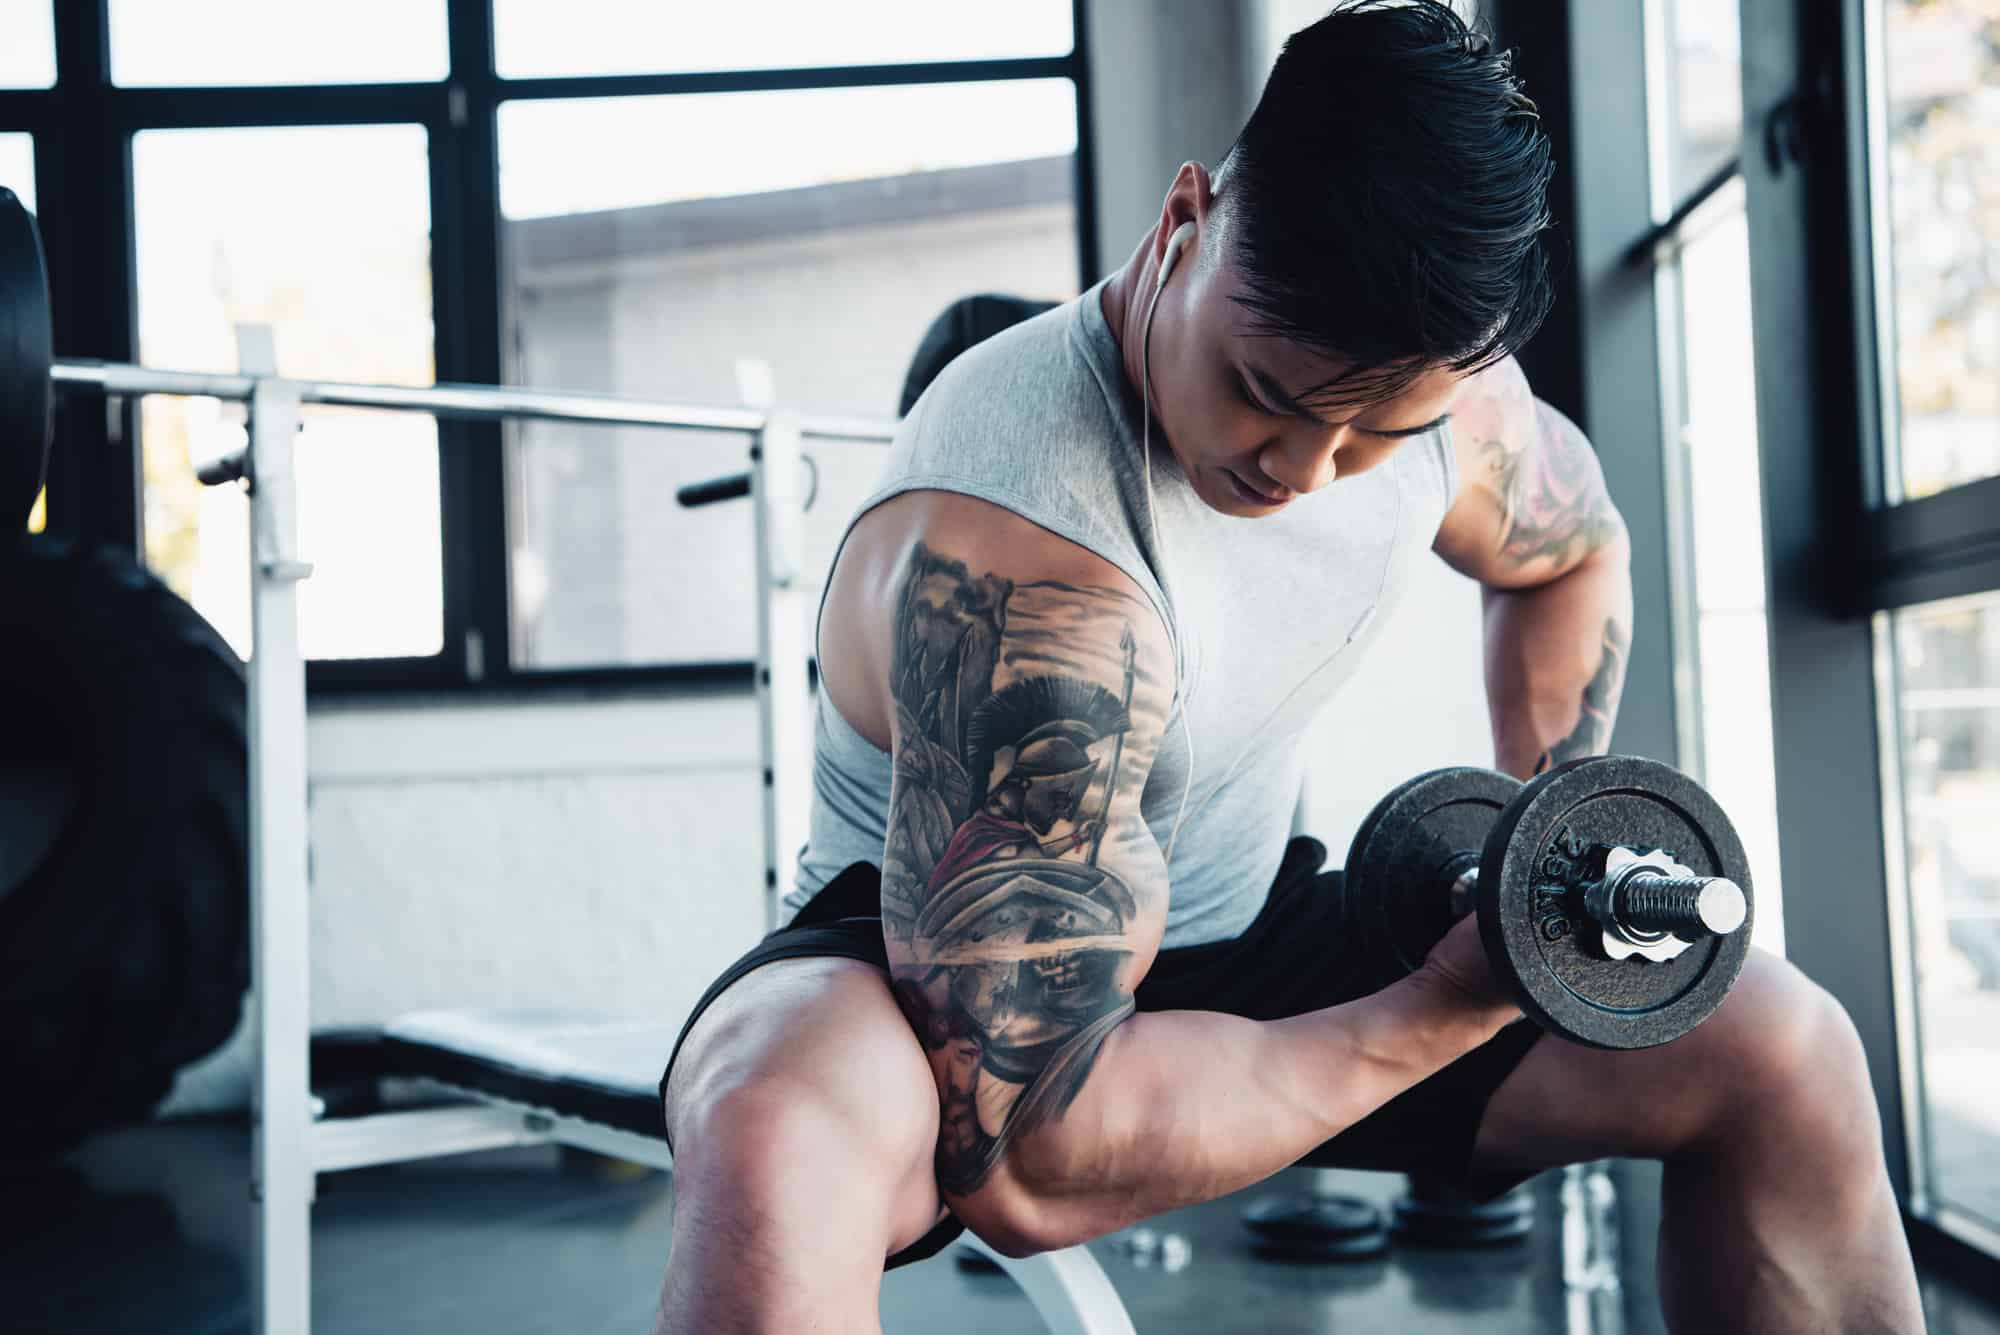 <p><em>“Men that have soo much muscle. Obviously it's very attractive to be in shape but I'm just not attracted to men that have arms the size of two watermelons with the fattest veins ever popping out of their arm.”</em></p> <p>For some users, men with an excessive amount of muscle can be a bit overwhelming. There’s a fine line between being fit and appearing overly muscular, and some users find the latter to be less attractive, often citing concerns about proportions and the overall aesthetic.</p>